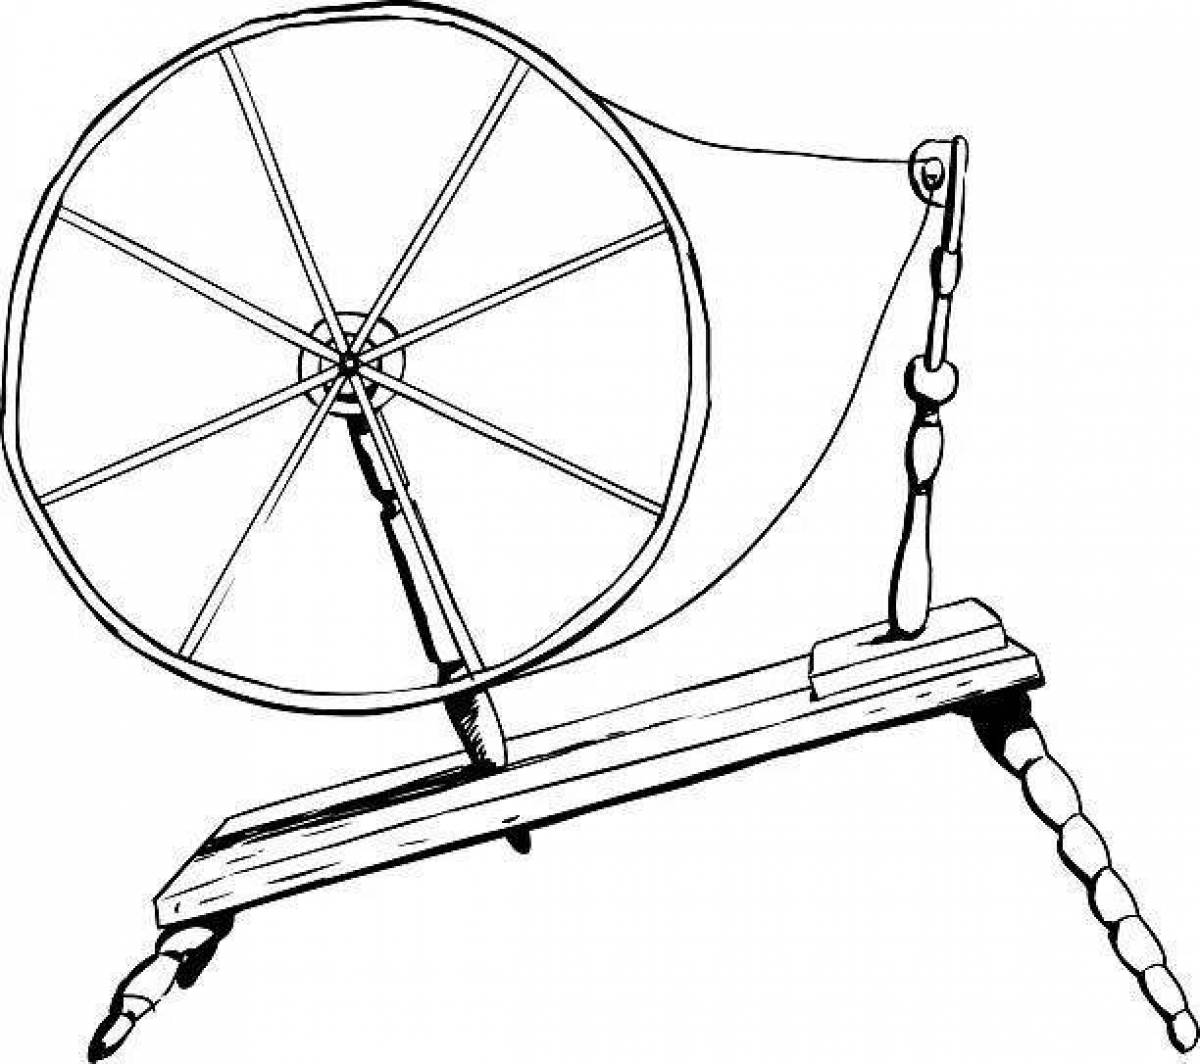 Fancy spinning wheel coloring page